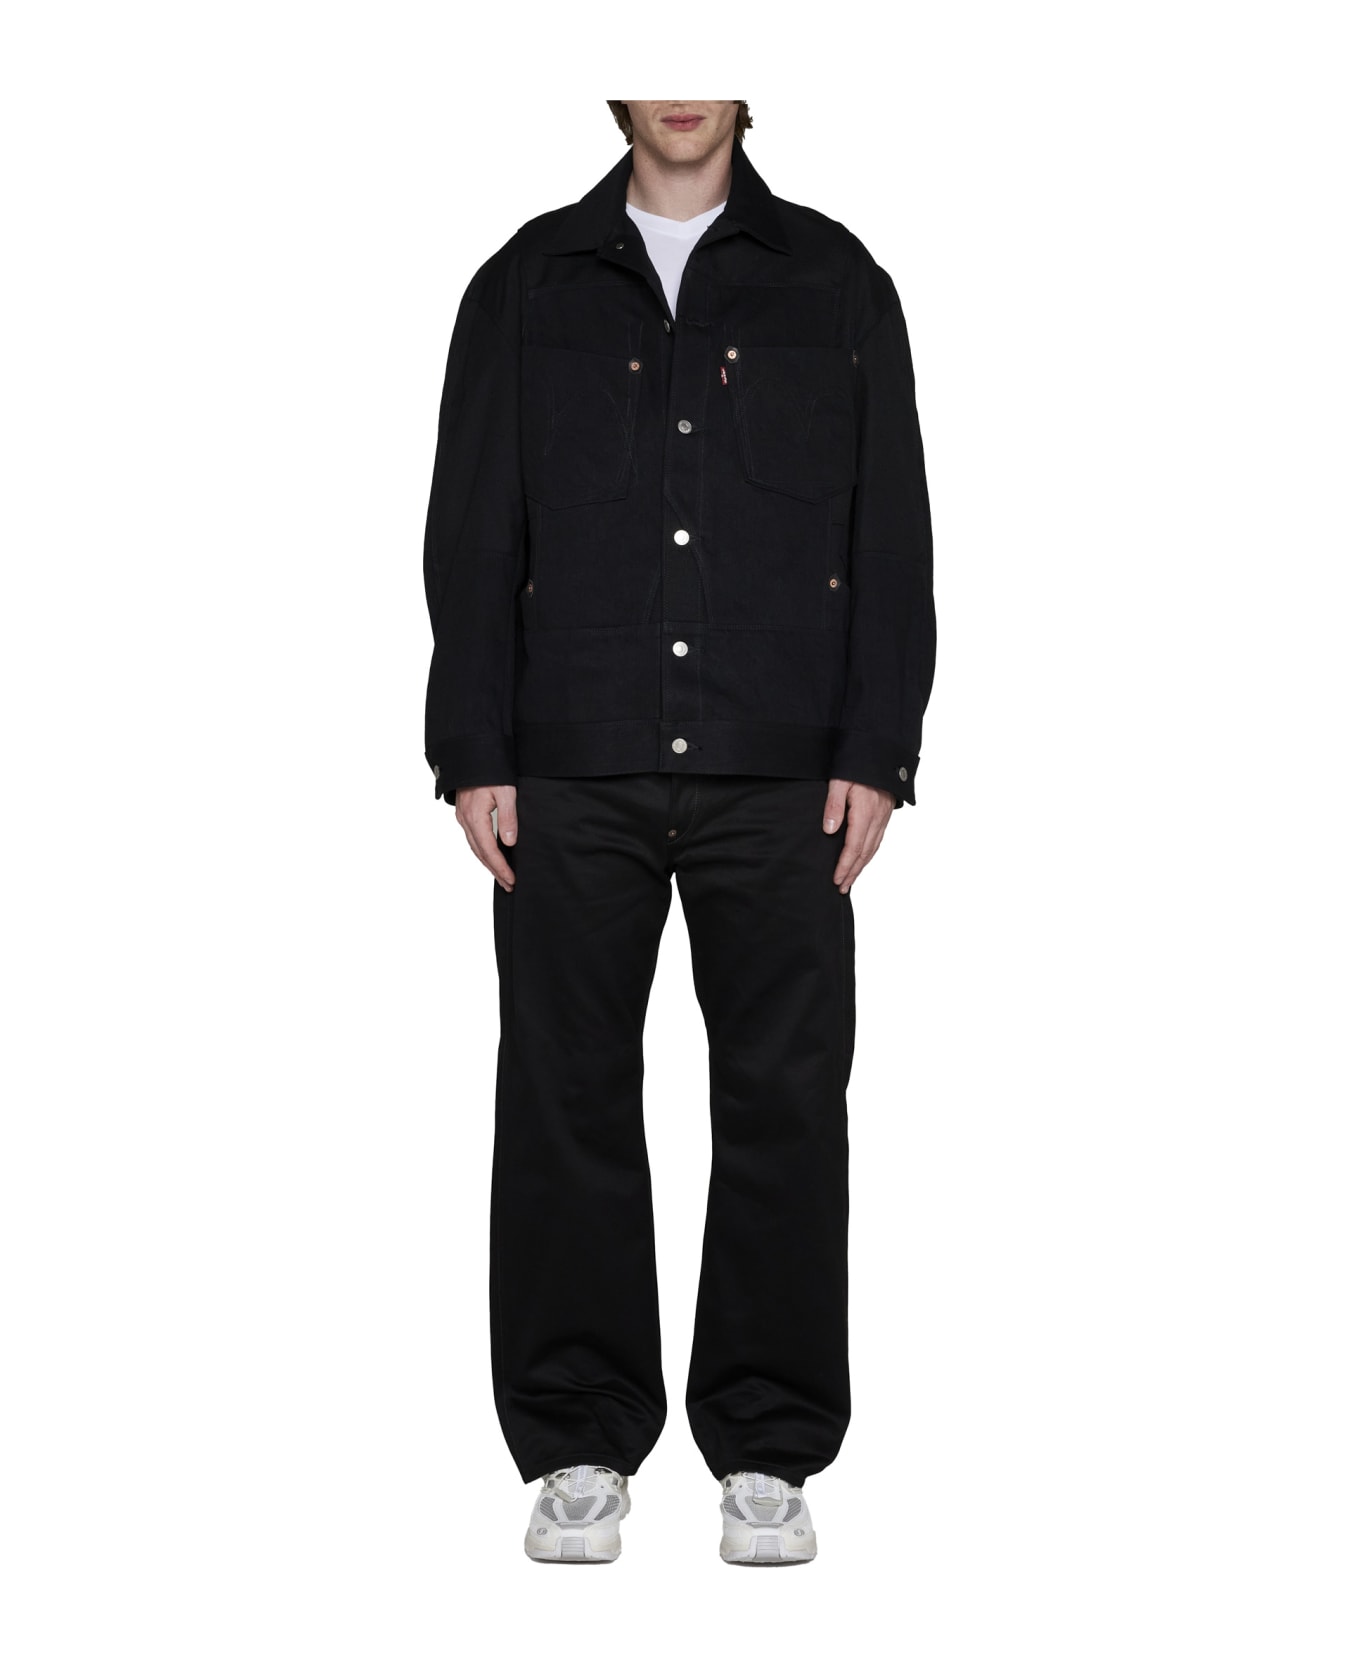 Junya Watanabe Comme Des Garçons Jacket - Would recommend this jacket